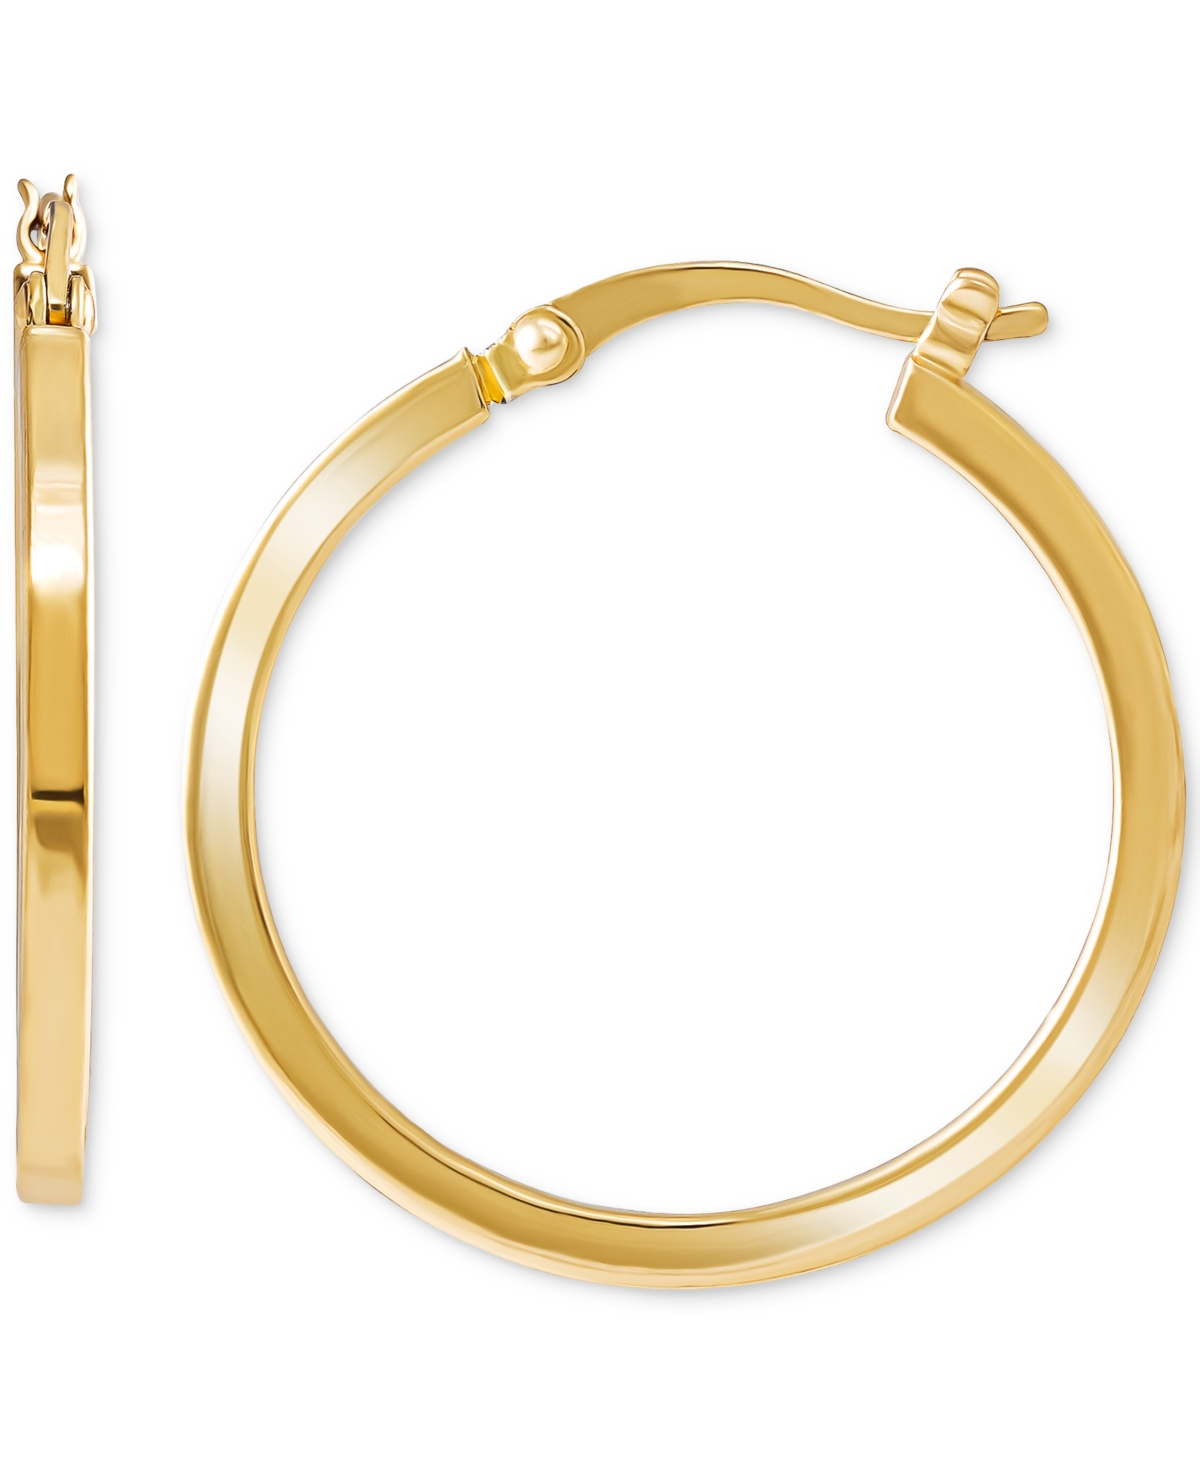 Giani Bernini Polished Squared Tube Small Hoop Earrings In 18k Gold-plated Sterling Silver, 7/8", Created For Macy In Gold Over Silver